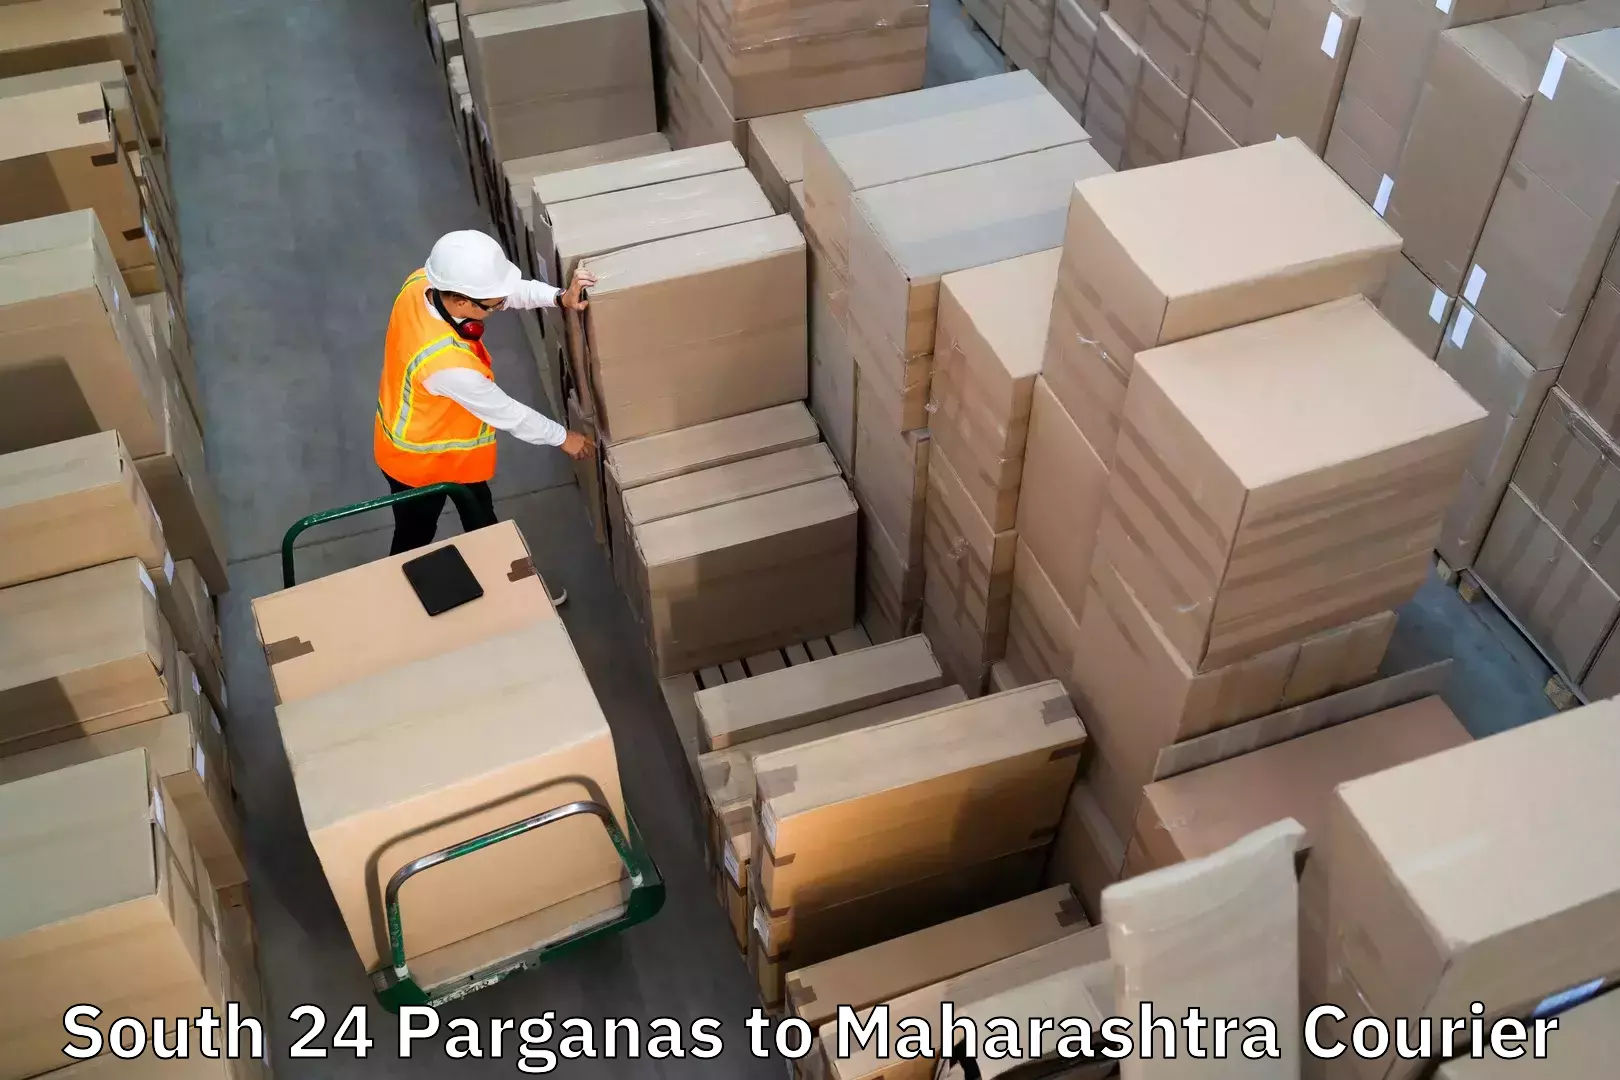 Luggage shipment tracking in South 24 Parganas to Shrirampur